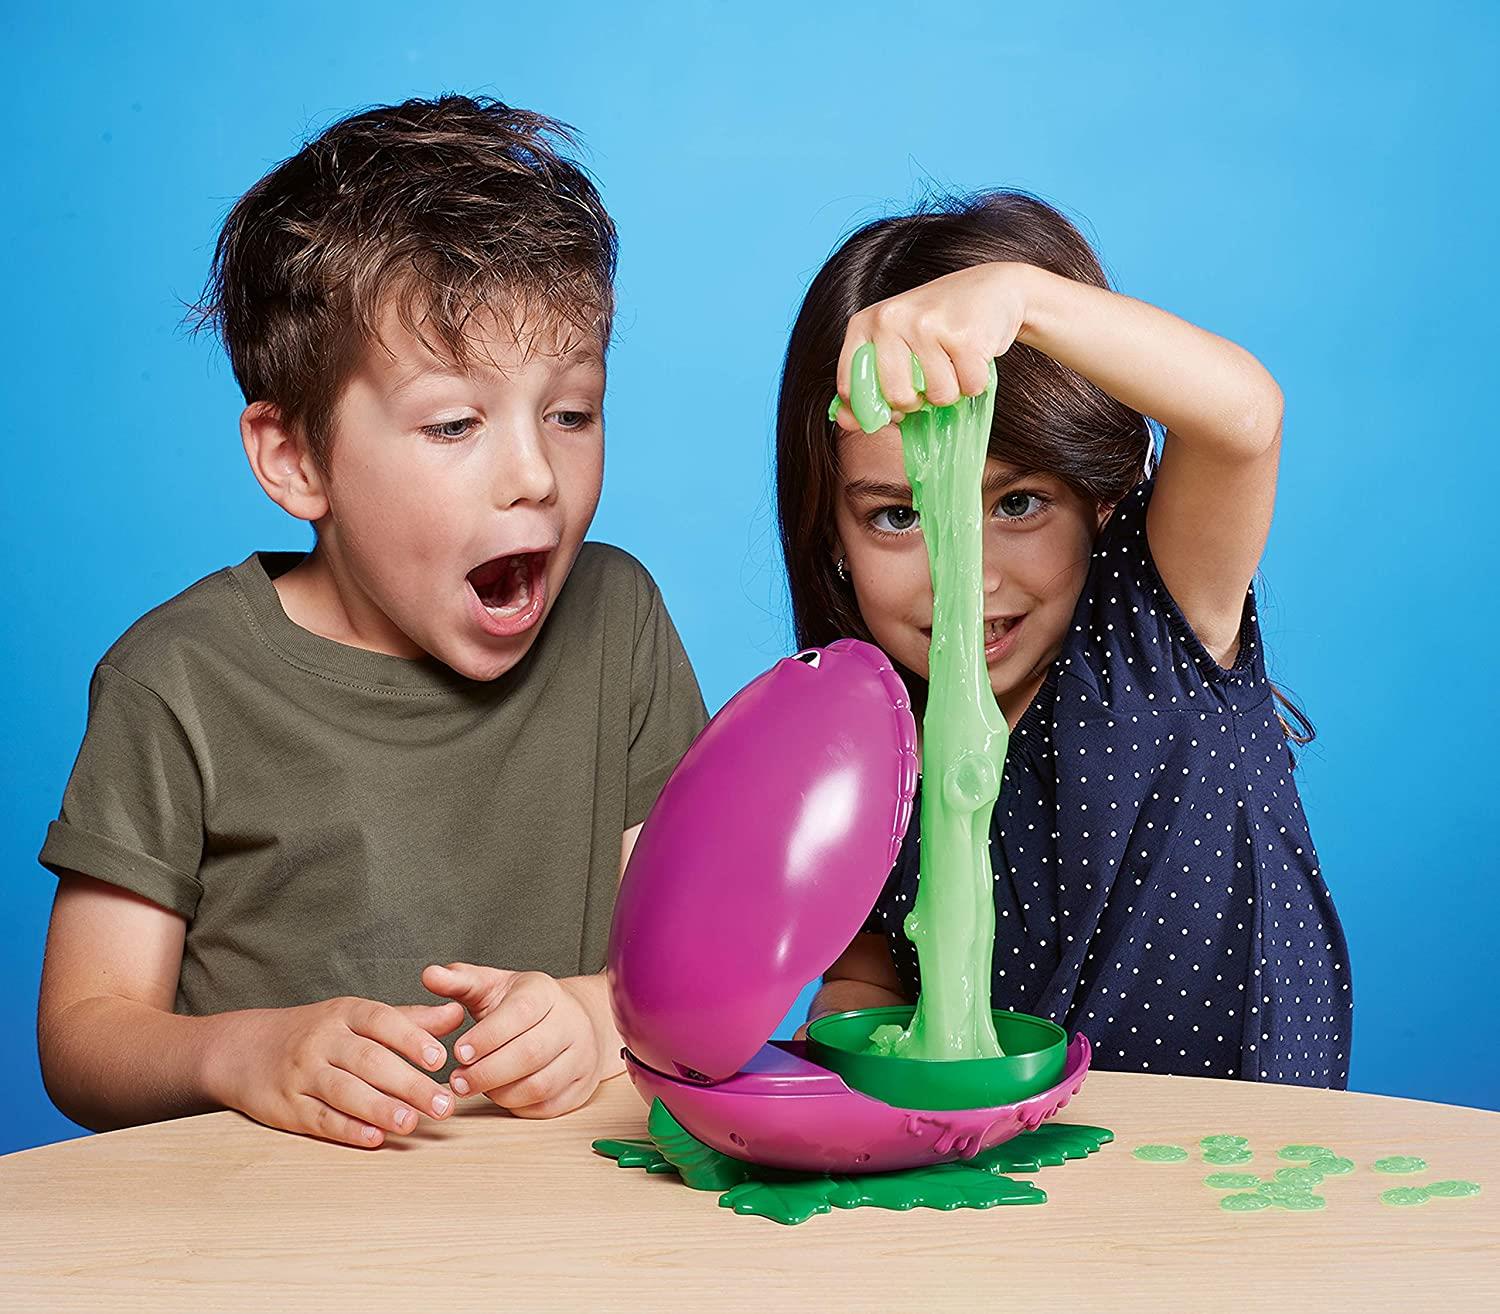 Ravensburger Game Slimy Joe Kids, Family Board Game with Slime